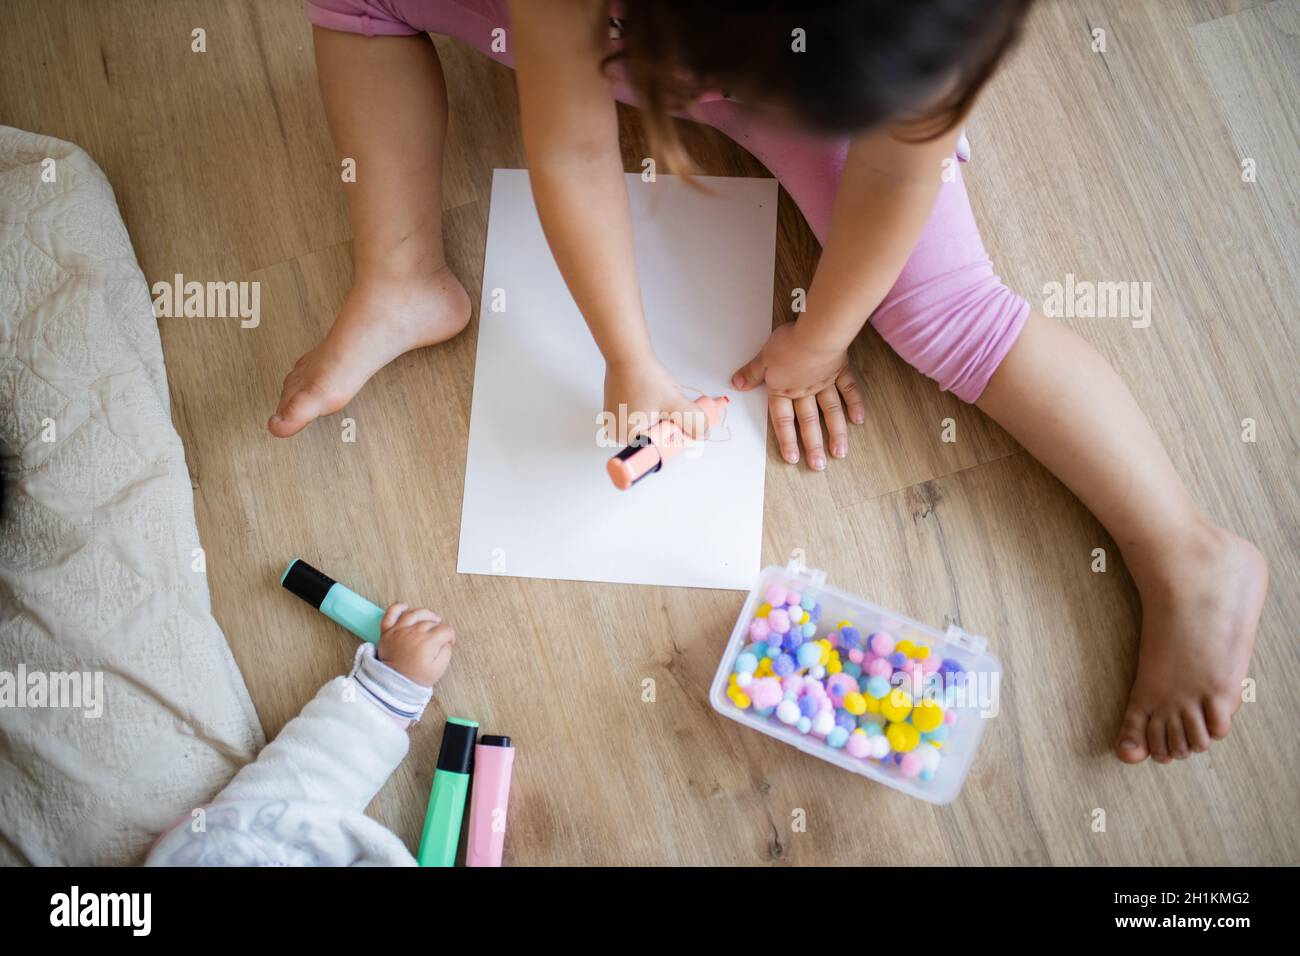 Landscape picture of a little girl in pink clothing sitting on a wooden floor and doing sums on a paper sheet with a pink textmarker and colorful cott Stock Photo